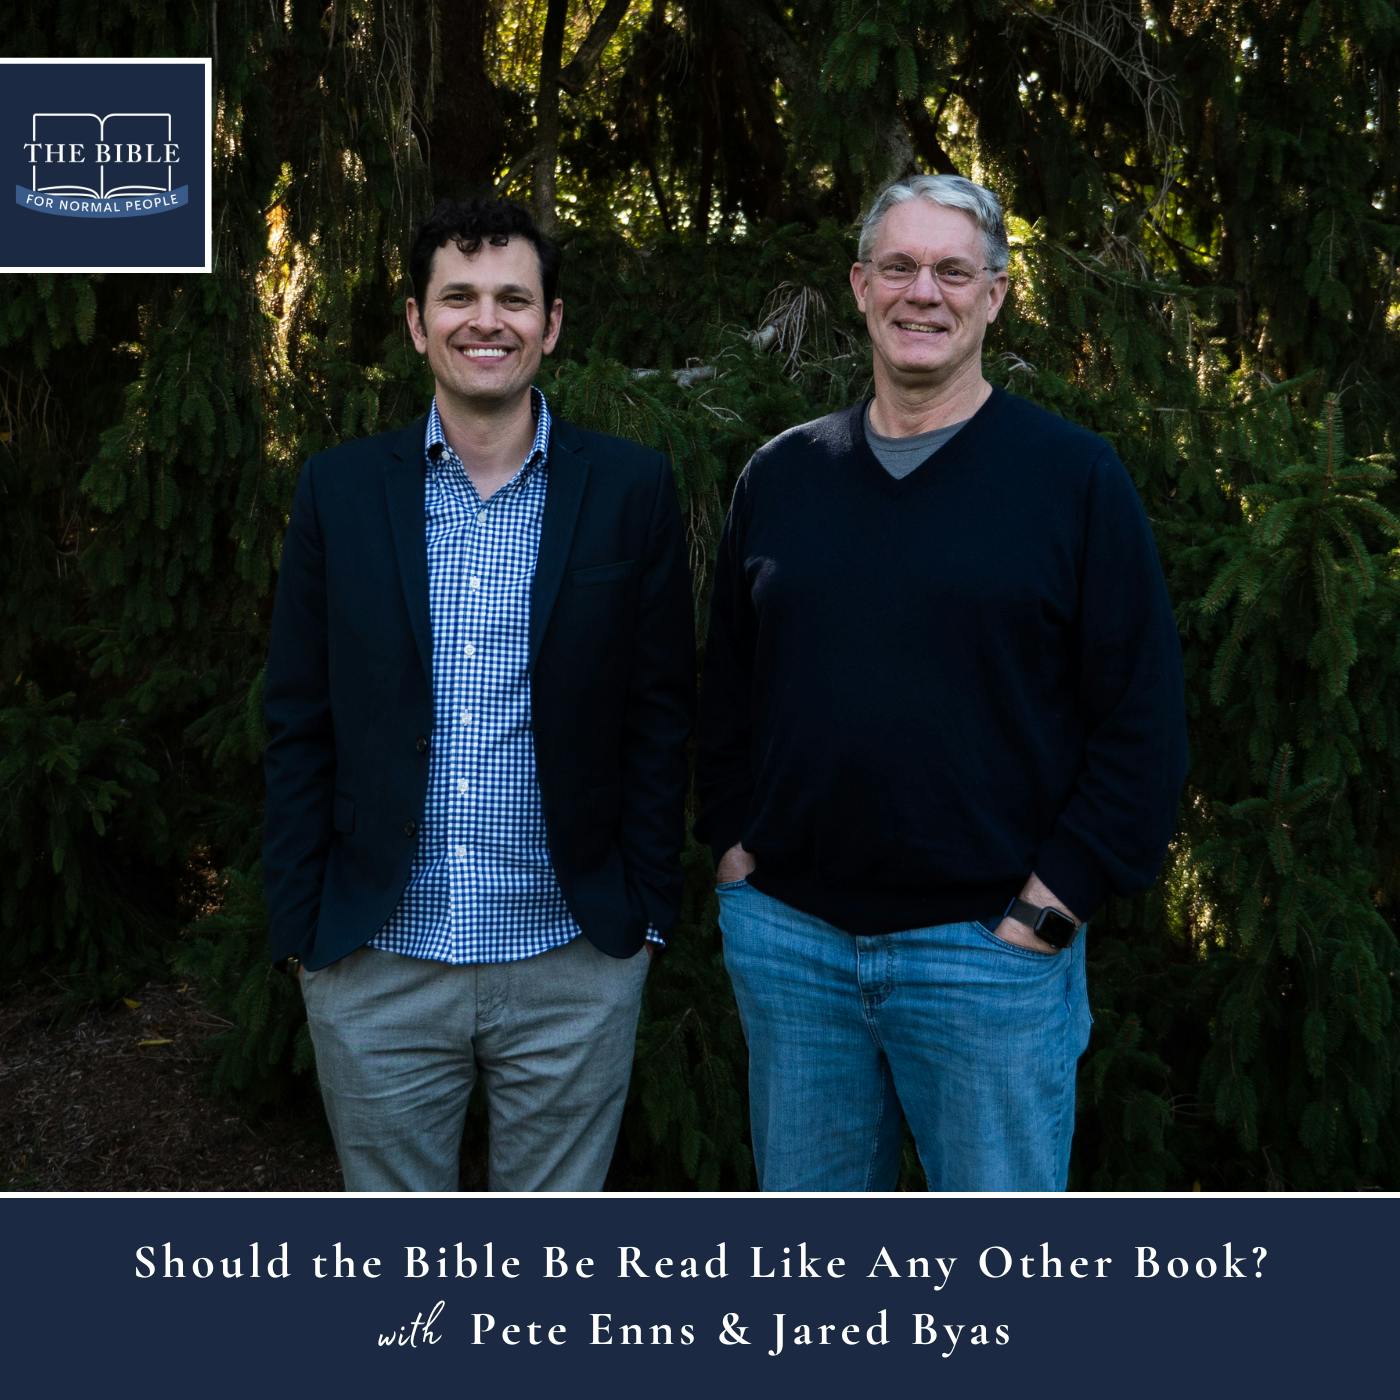 [Bible] Episode 236: Pete Enns & Jared Byas - Should the Bible Be Read Like Any Other Book?